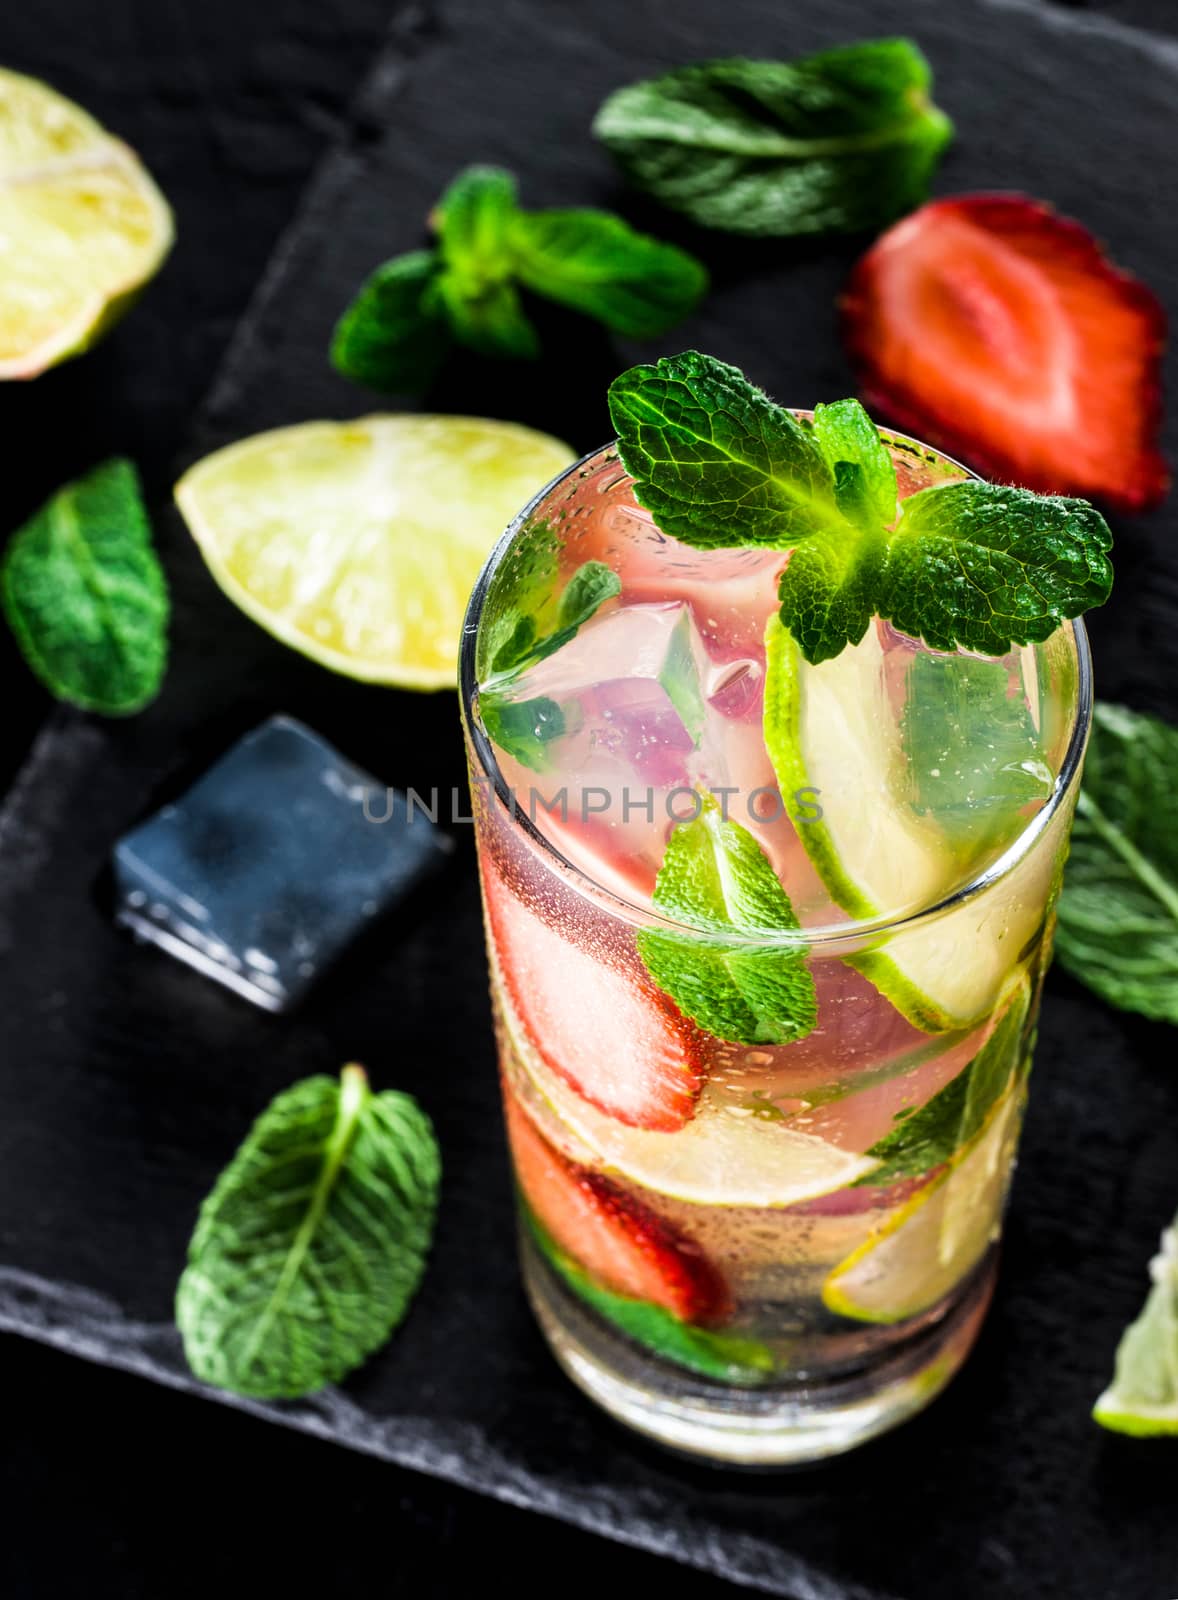 fresh lemonade with strawberry, lime and mint on dark stone background. Cold summer strawberry drink with mint and ice. Strawberry mojito in glass and ingredients. Vertical